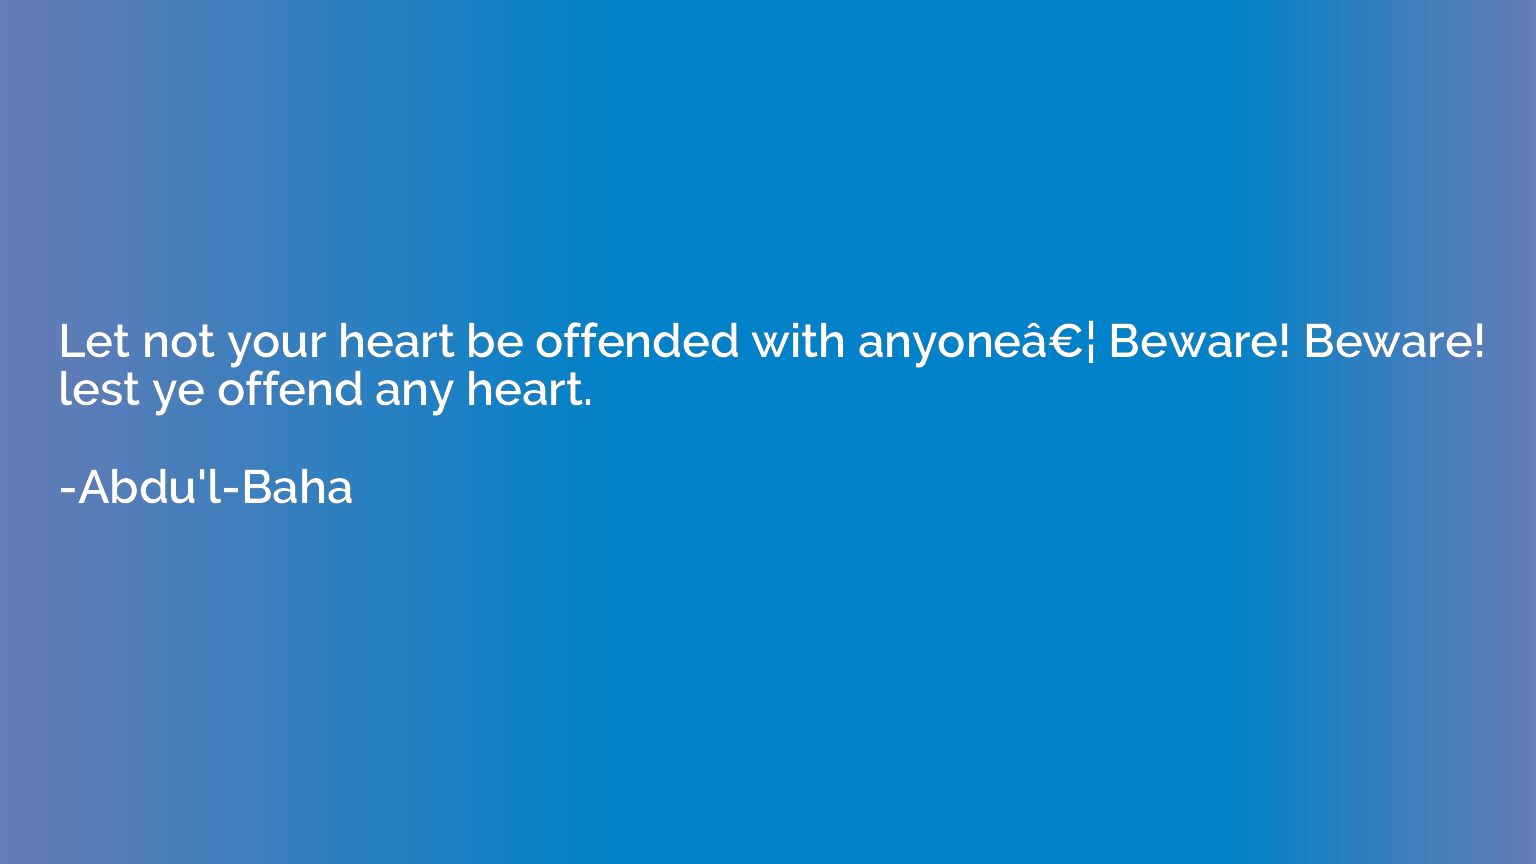 Let not your heart be offended with anyoneâ€¦ Beware! Beware